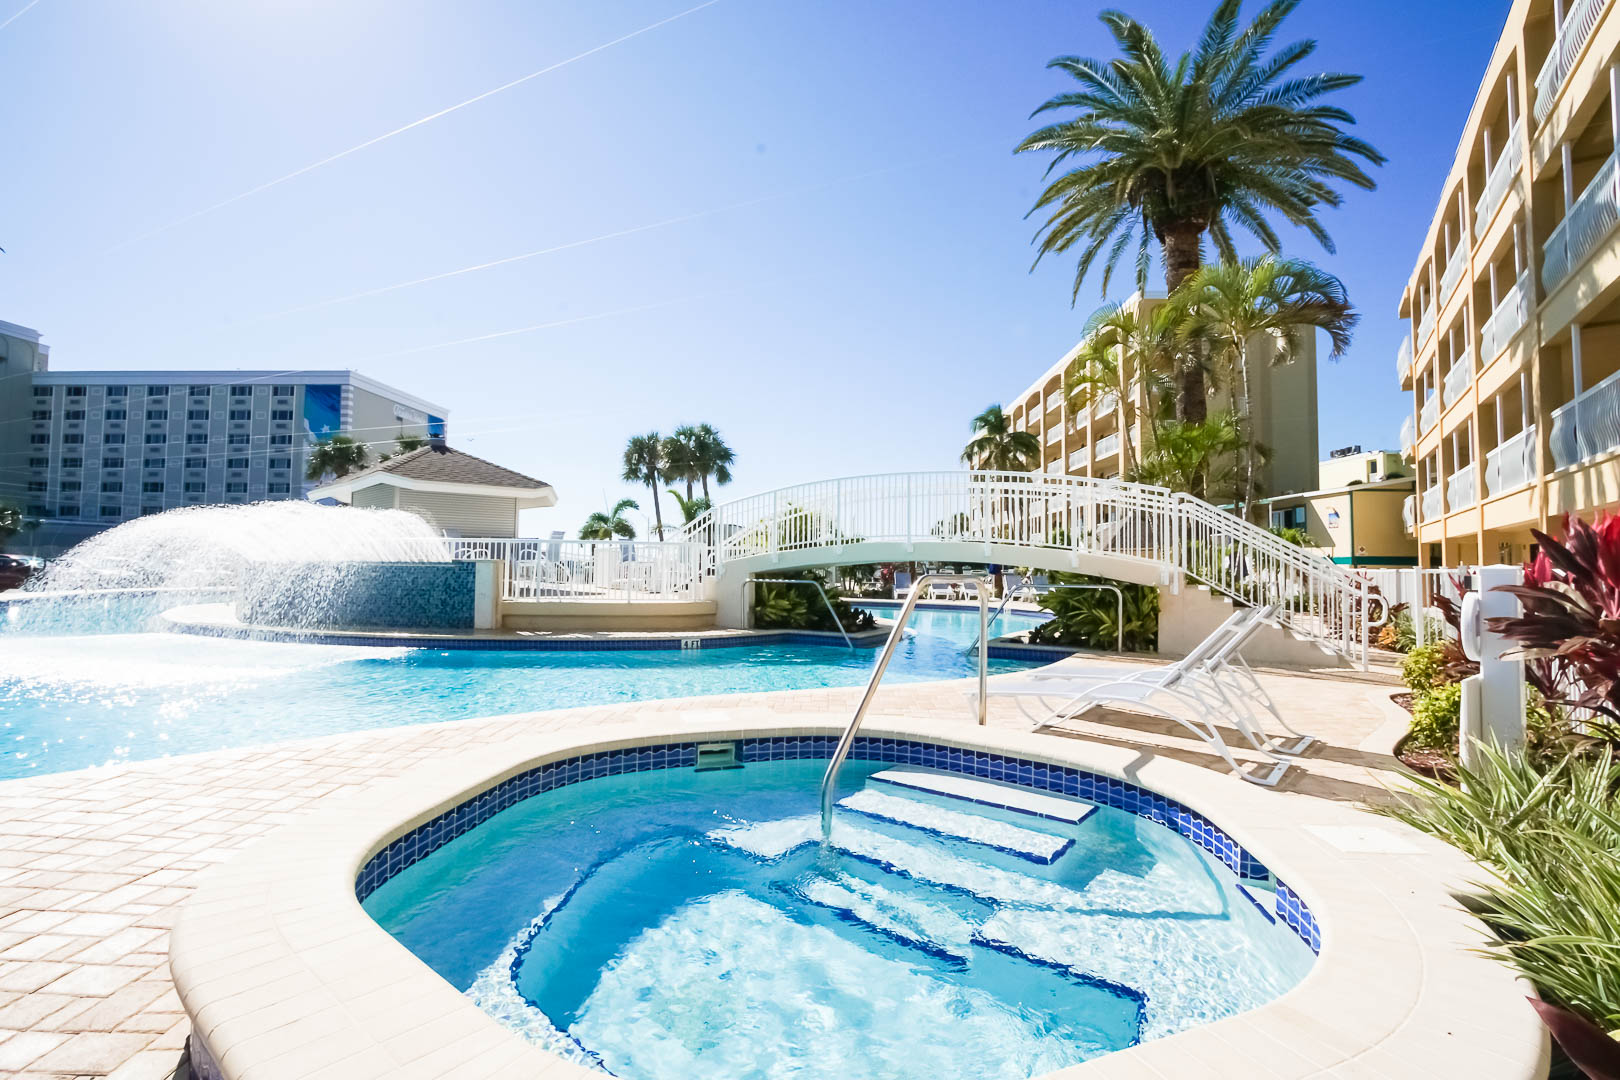 An outdoor pool and Jacuzzi tub at VRI's Coral Reef Beach Resort in St. Pete Beach, Florida.